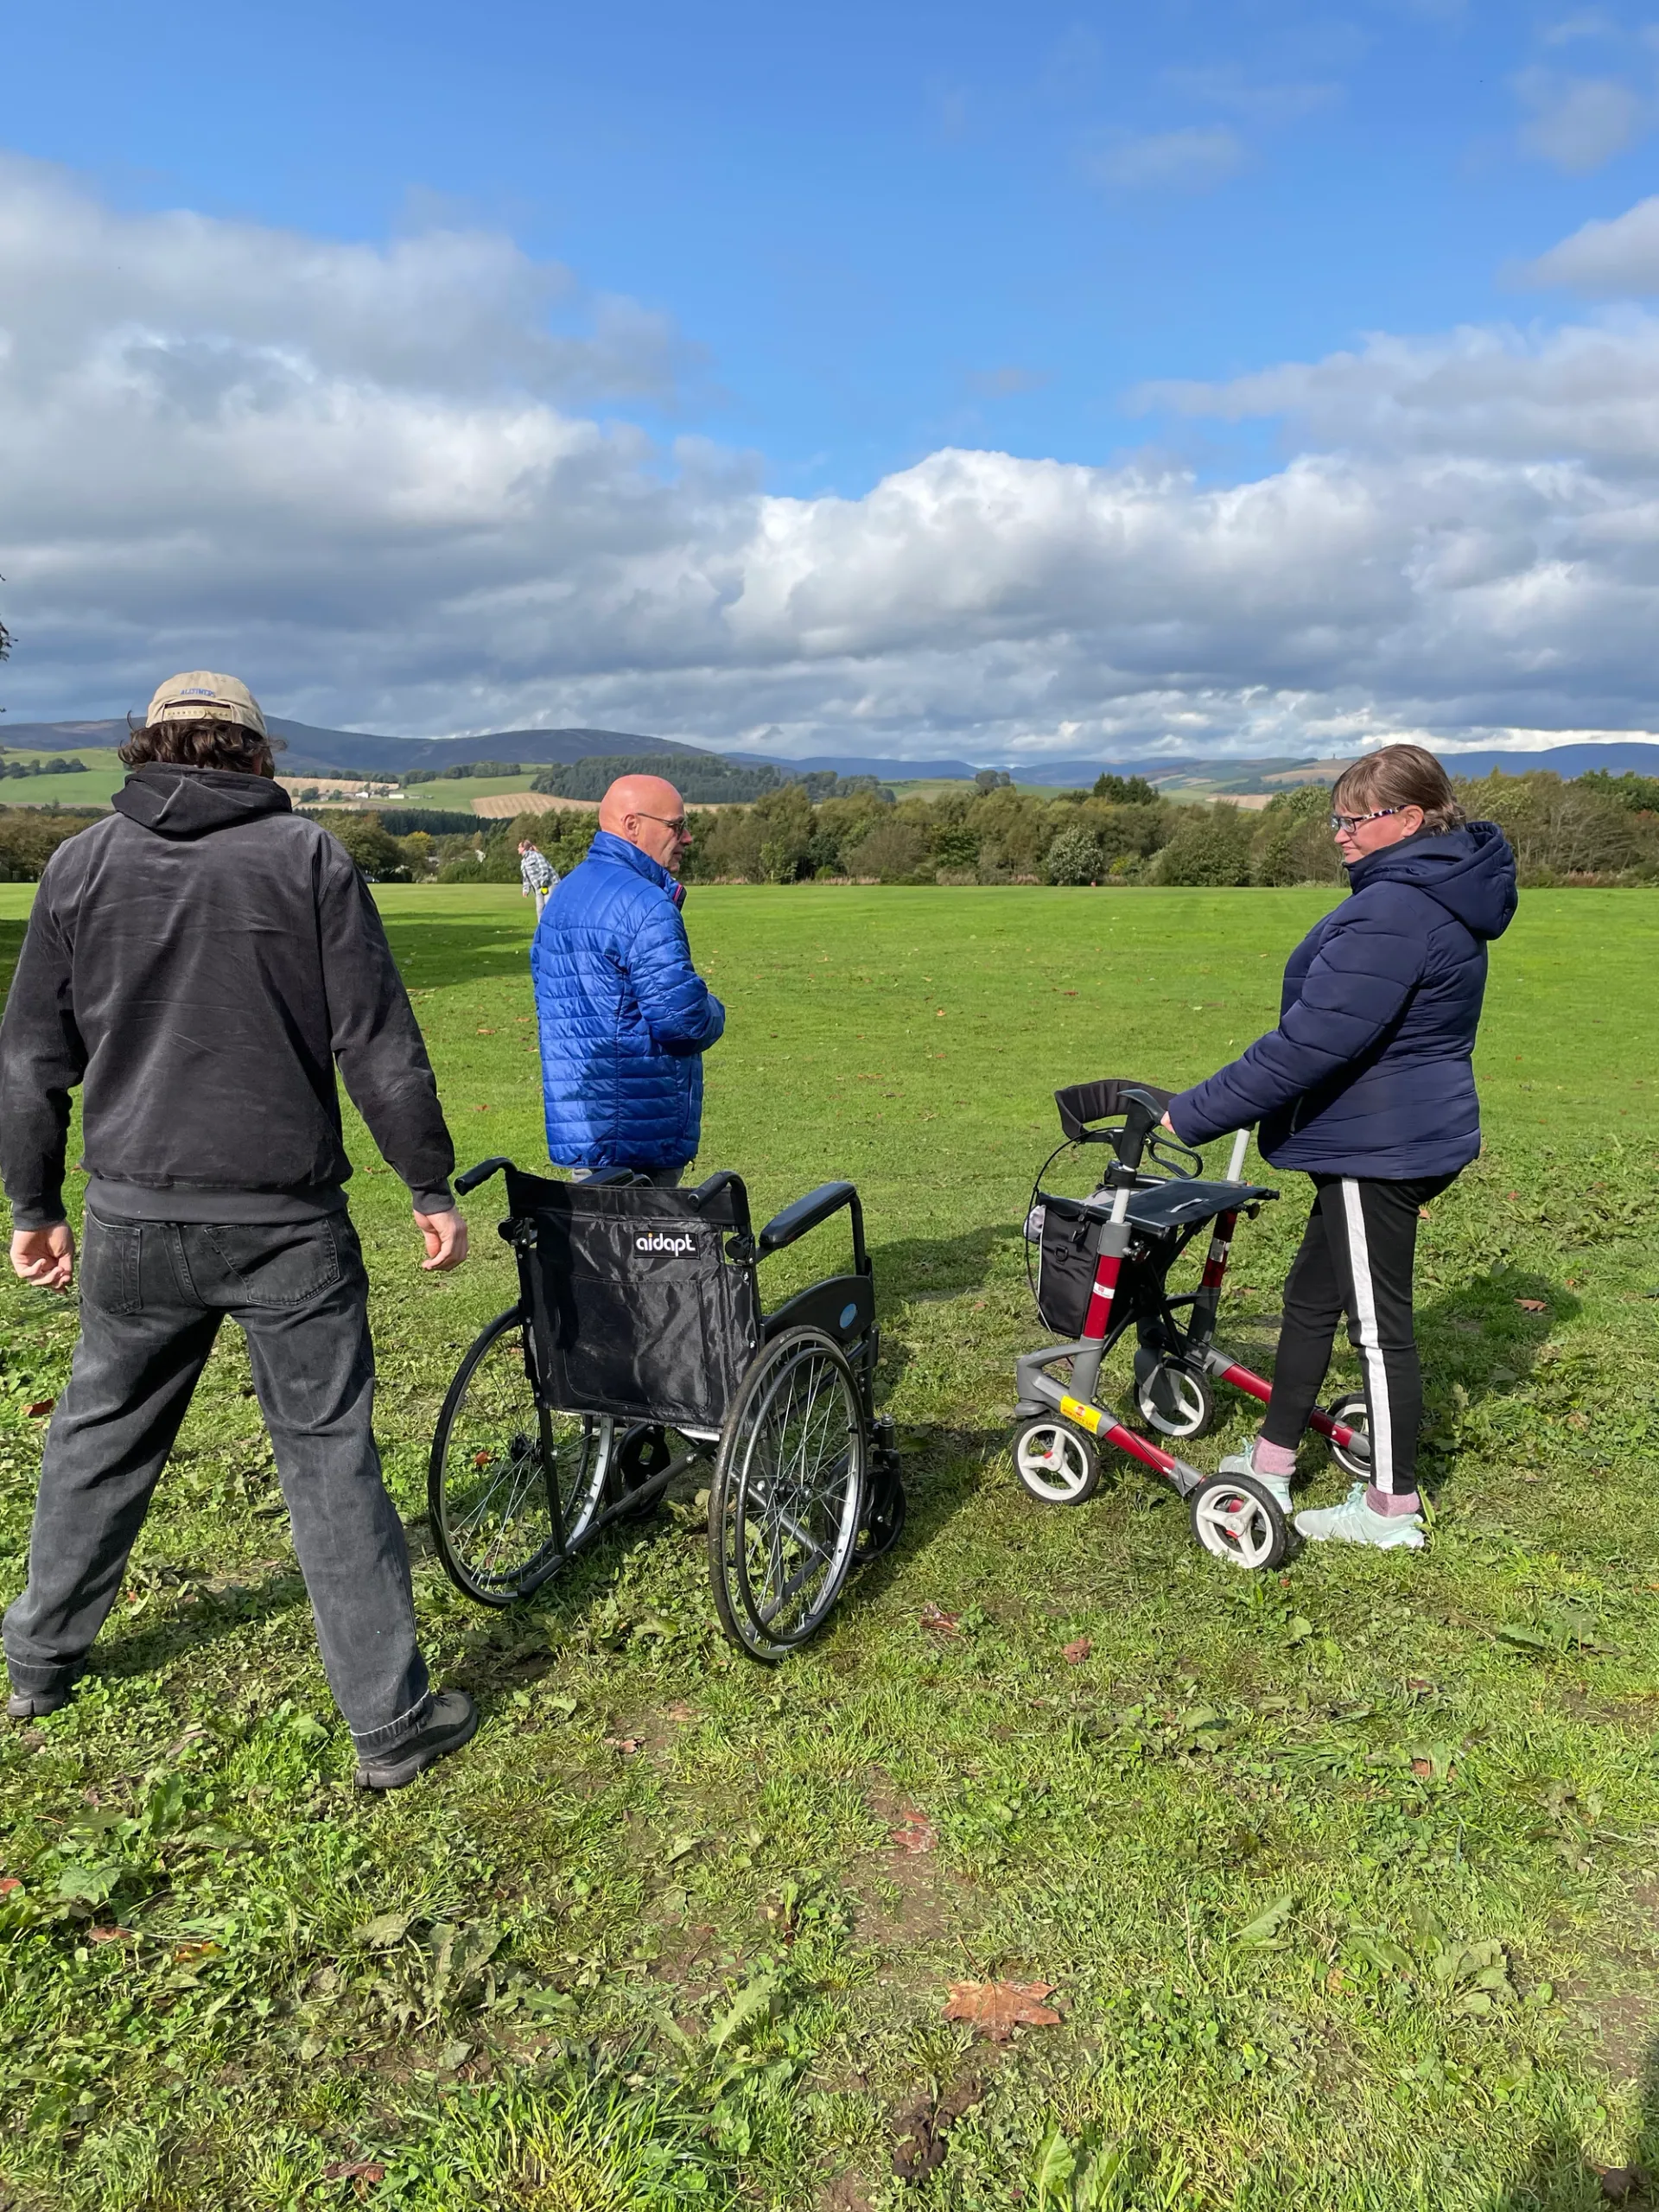 3 people stand looking at a huge sweep of green grass, trees and hills under a blue, white and grey cloud-filled sky. One person stands with a mobility walker, 2 people stand next to an empty wheelchair.